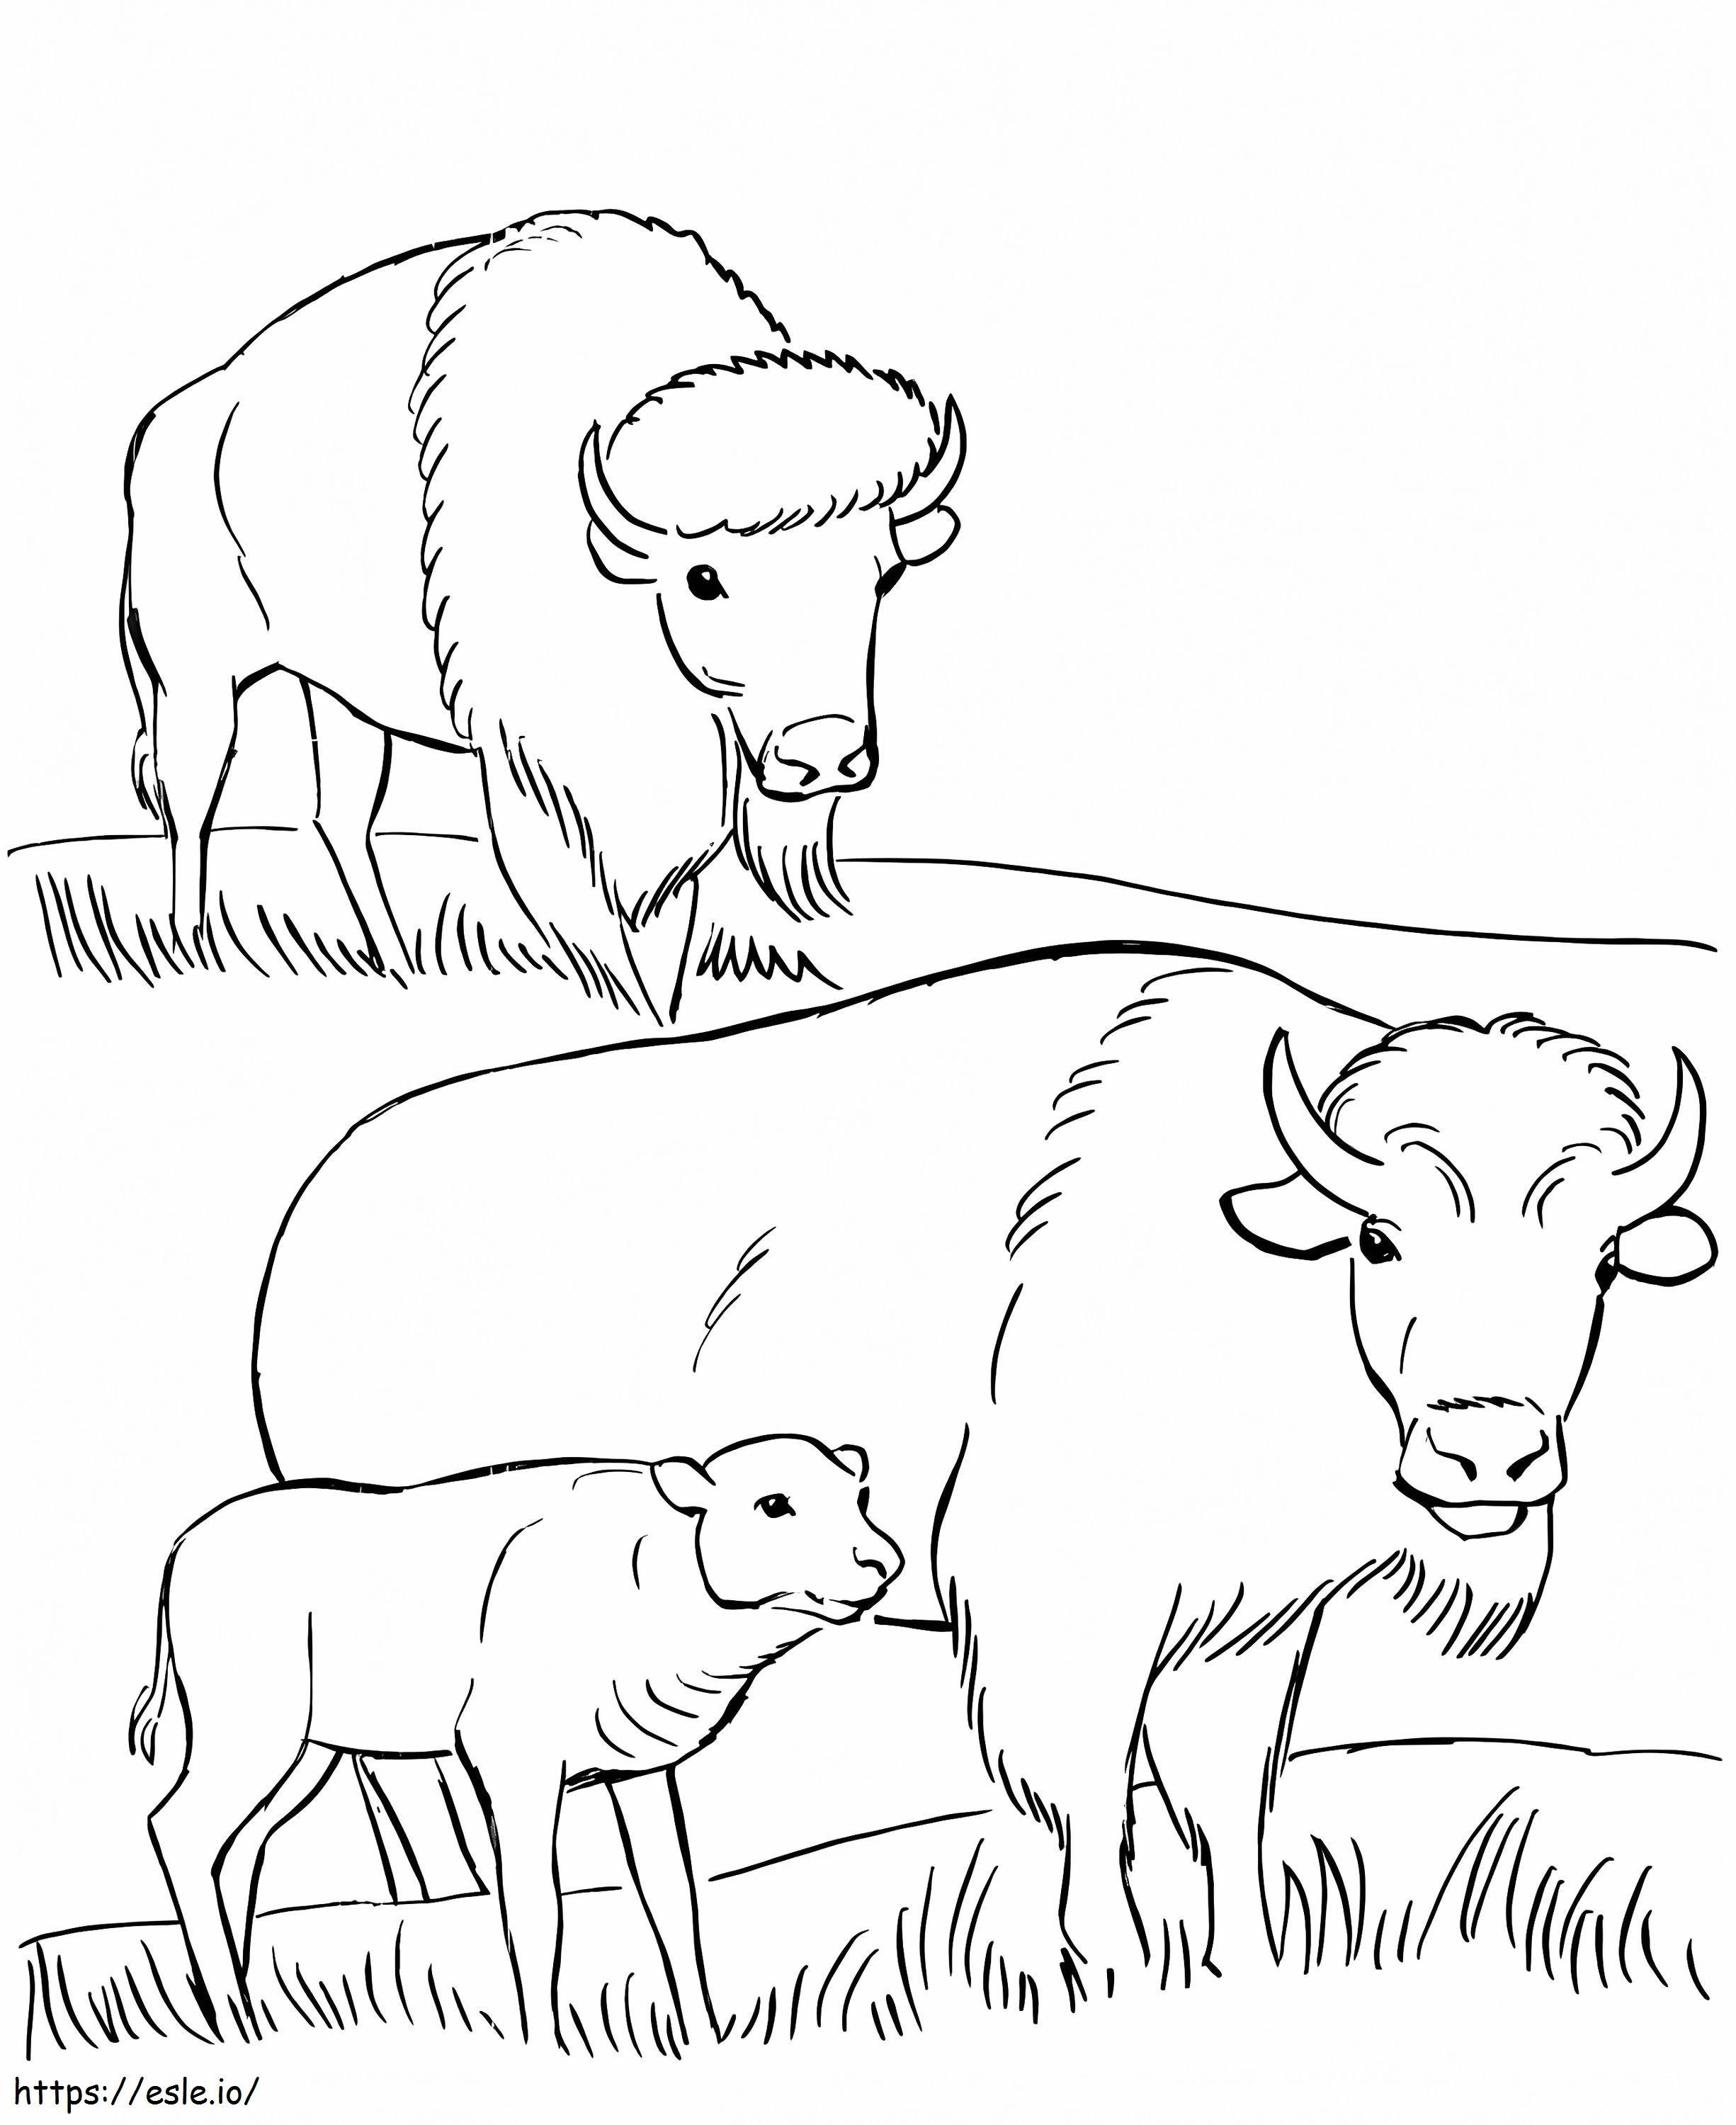 Family Bison coloring page